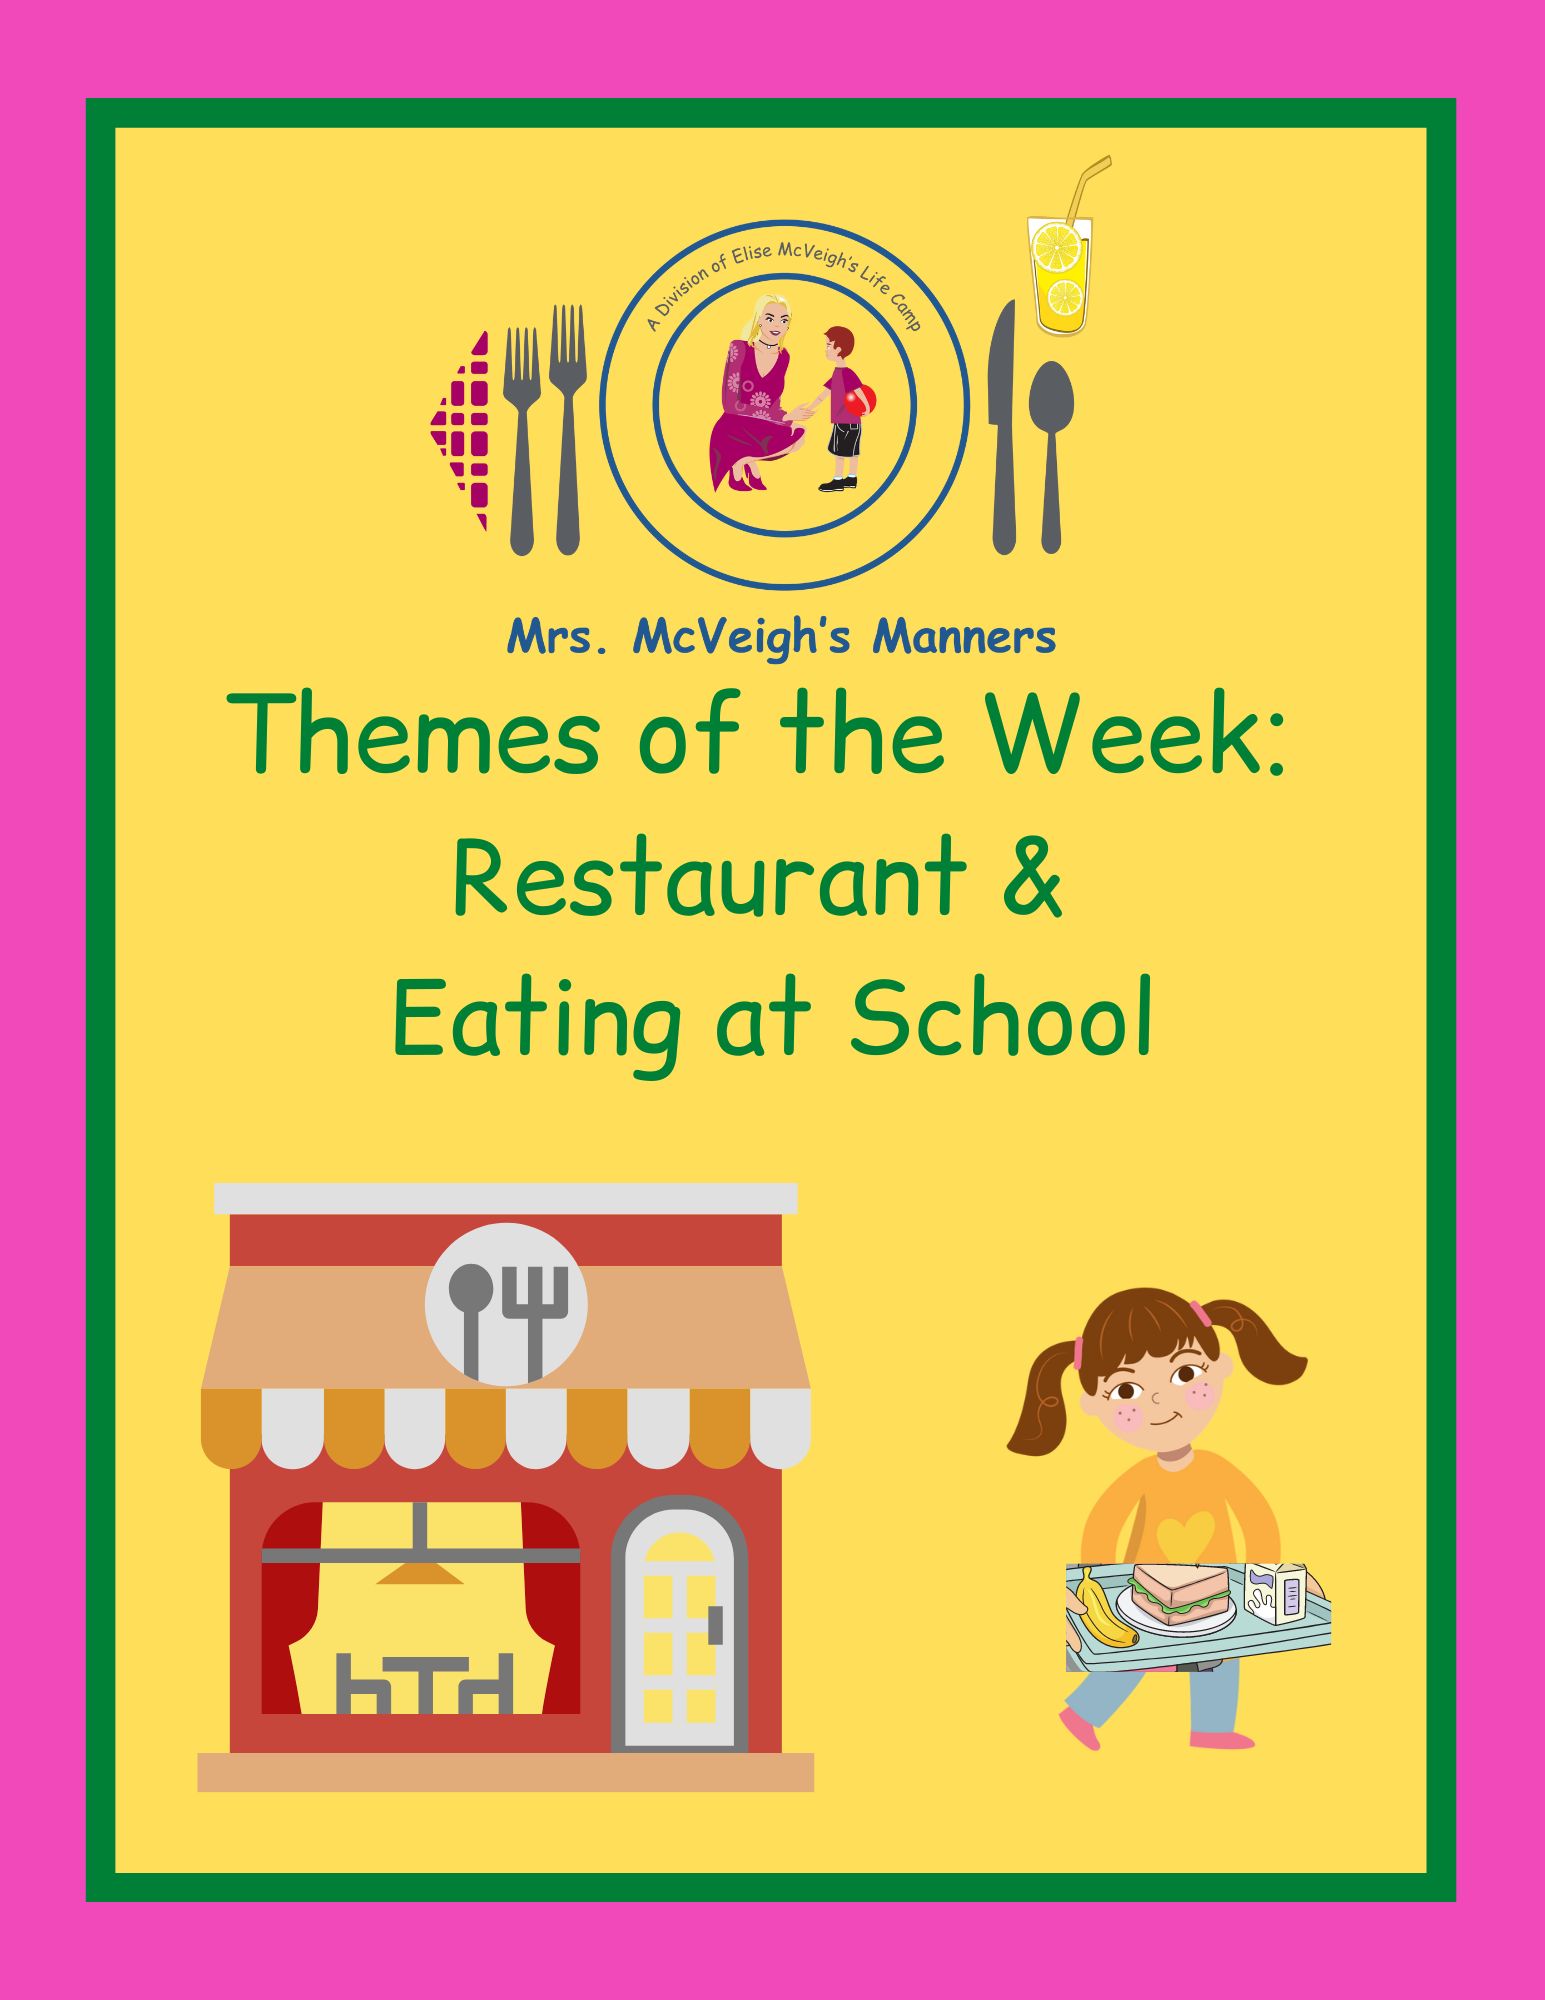 Restaurant & Eating at School – Themes of the Week